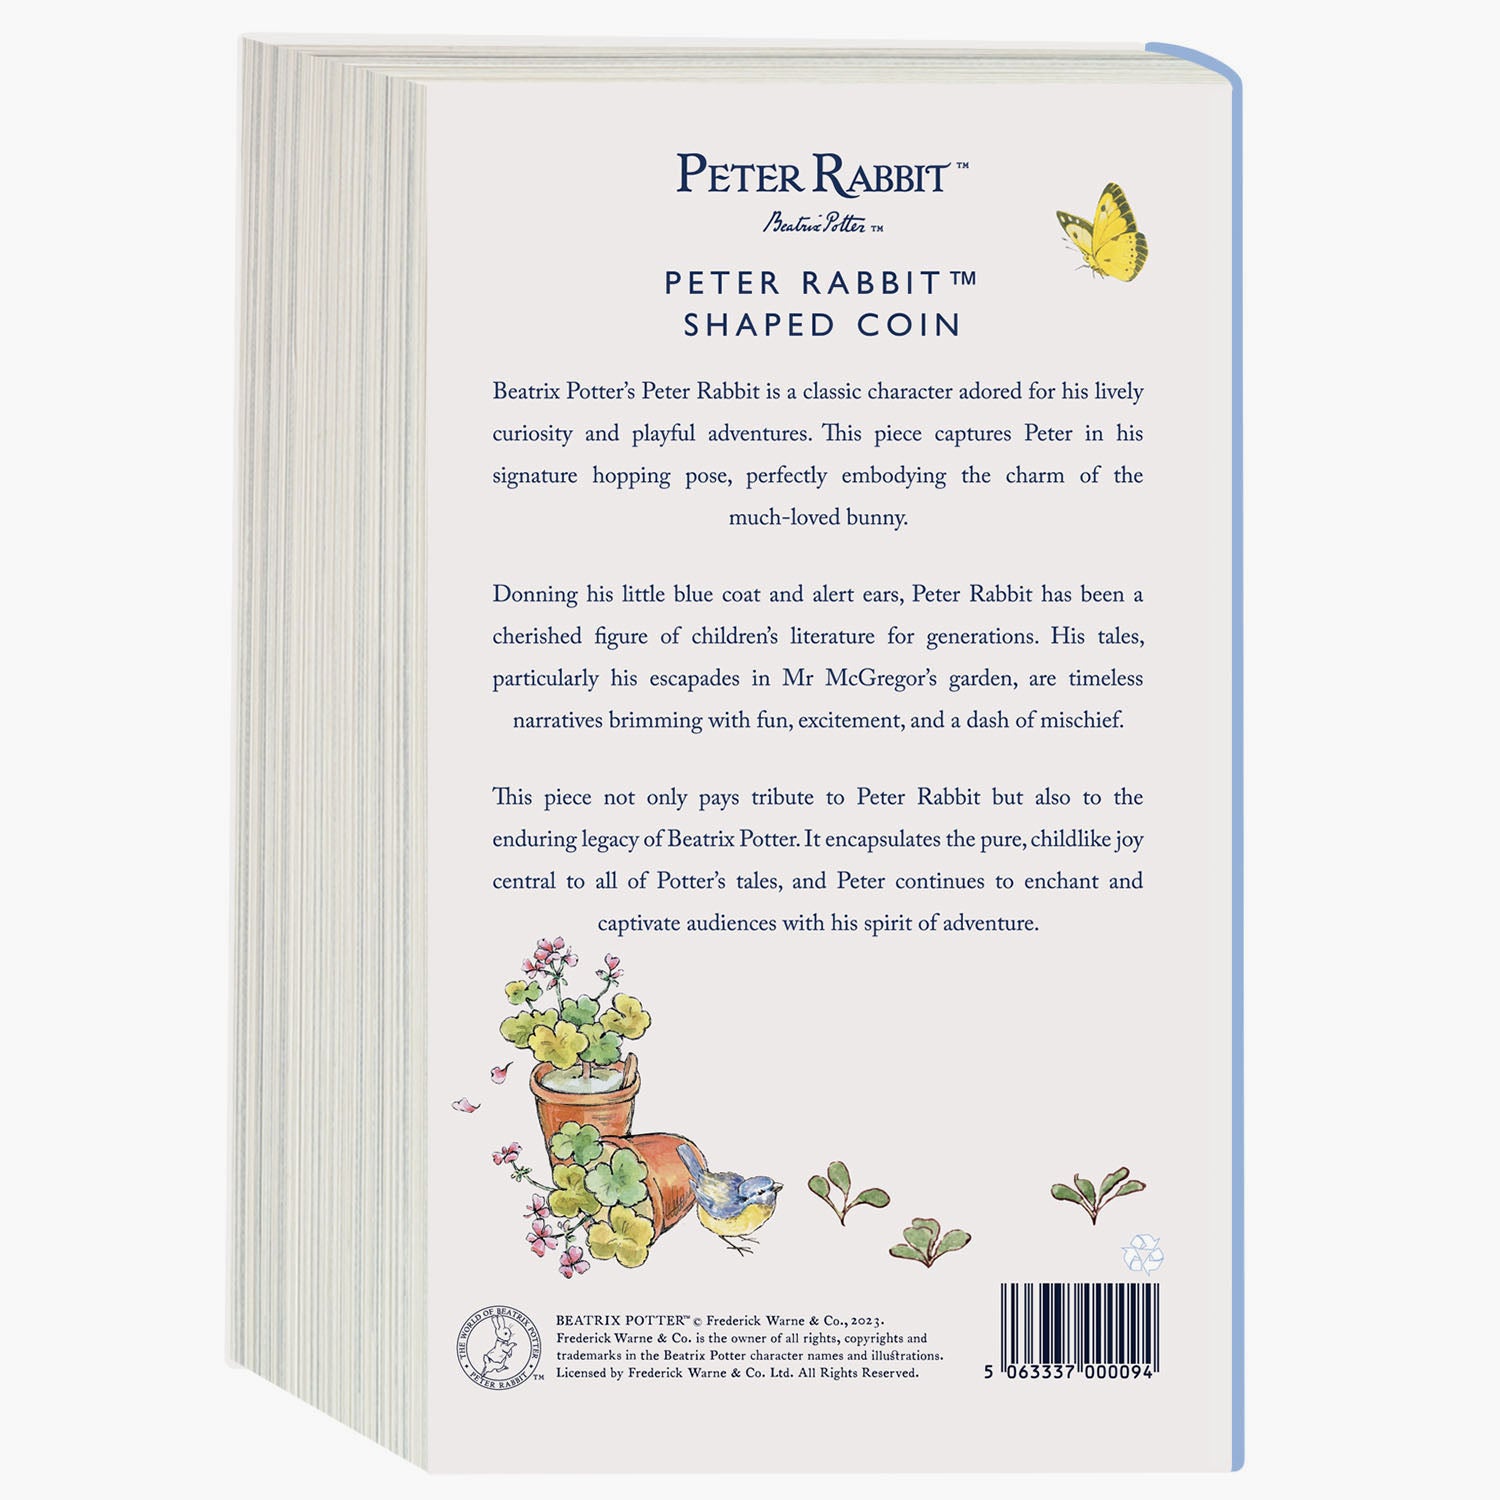 The World of Peter Rabbit 3D Shaped Coin